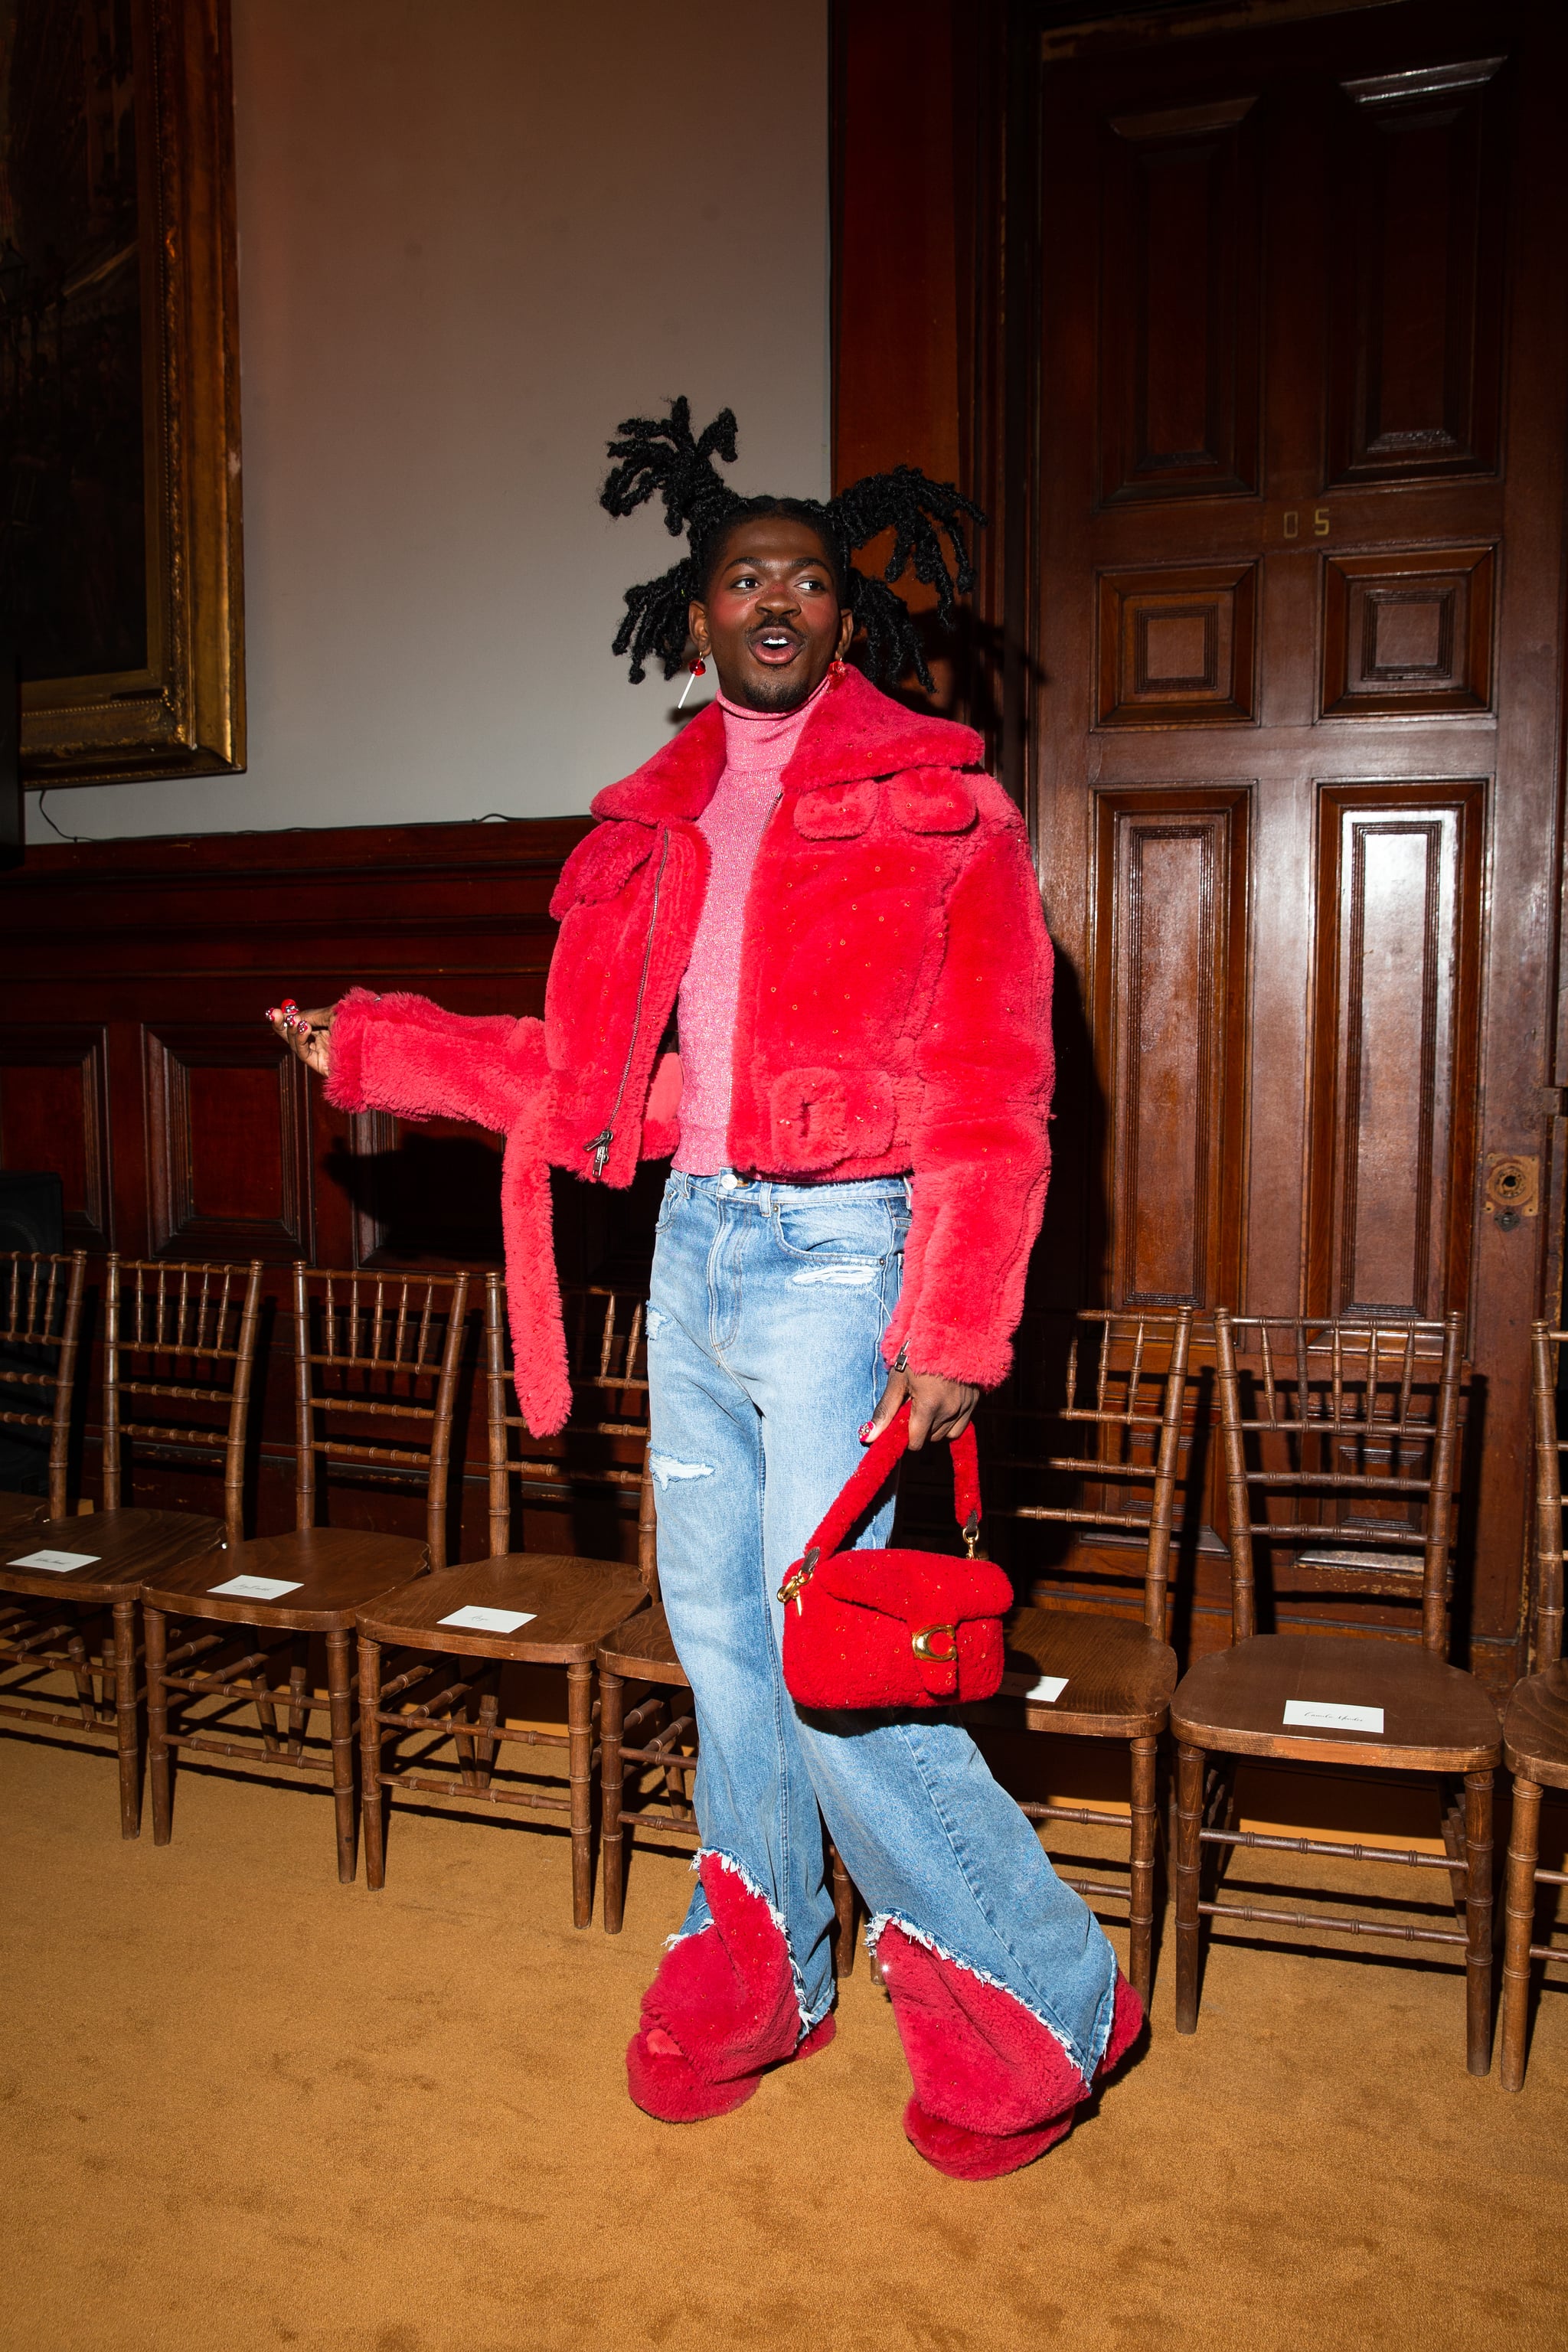 Lil Nas X in the front row at Coach Fall 2023 Ready To Wear Fashion Show at Park Avenue Armory on February 13, 2023 in New York, New York. (Photo by Lexie Moreland/WWD via Getty Images)